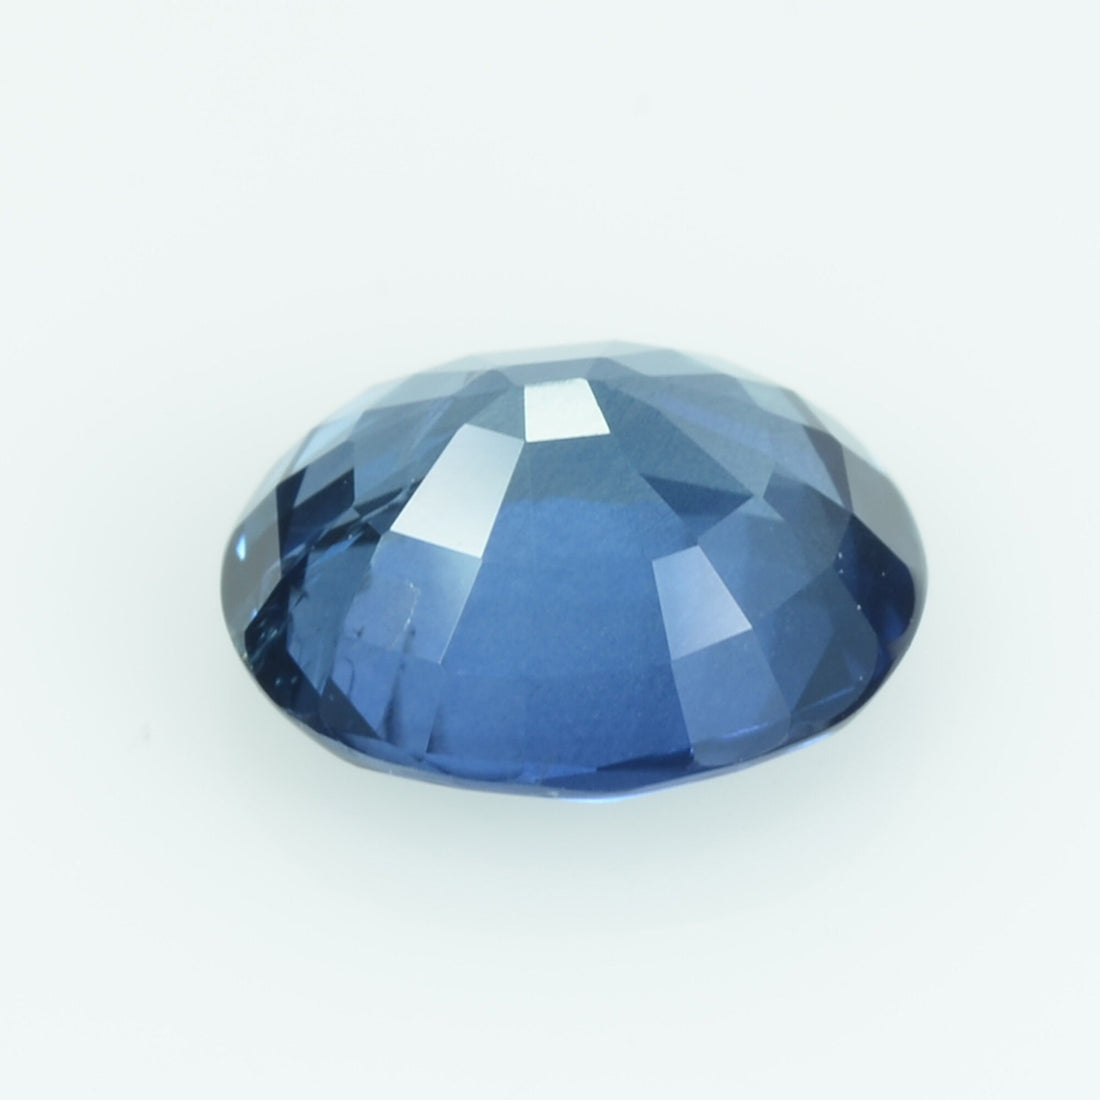 1.55 Cts Natural Blue Sapphire Loose Gemstone Oval Cut